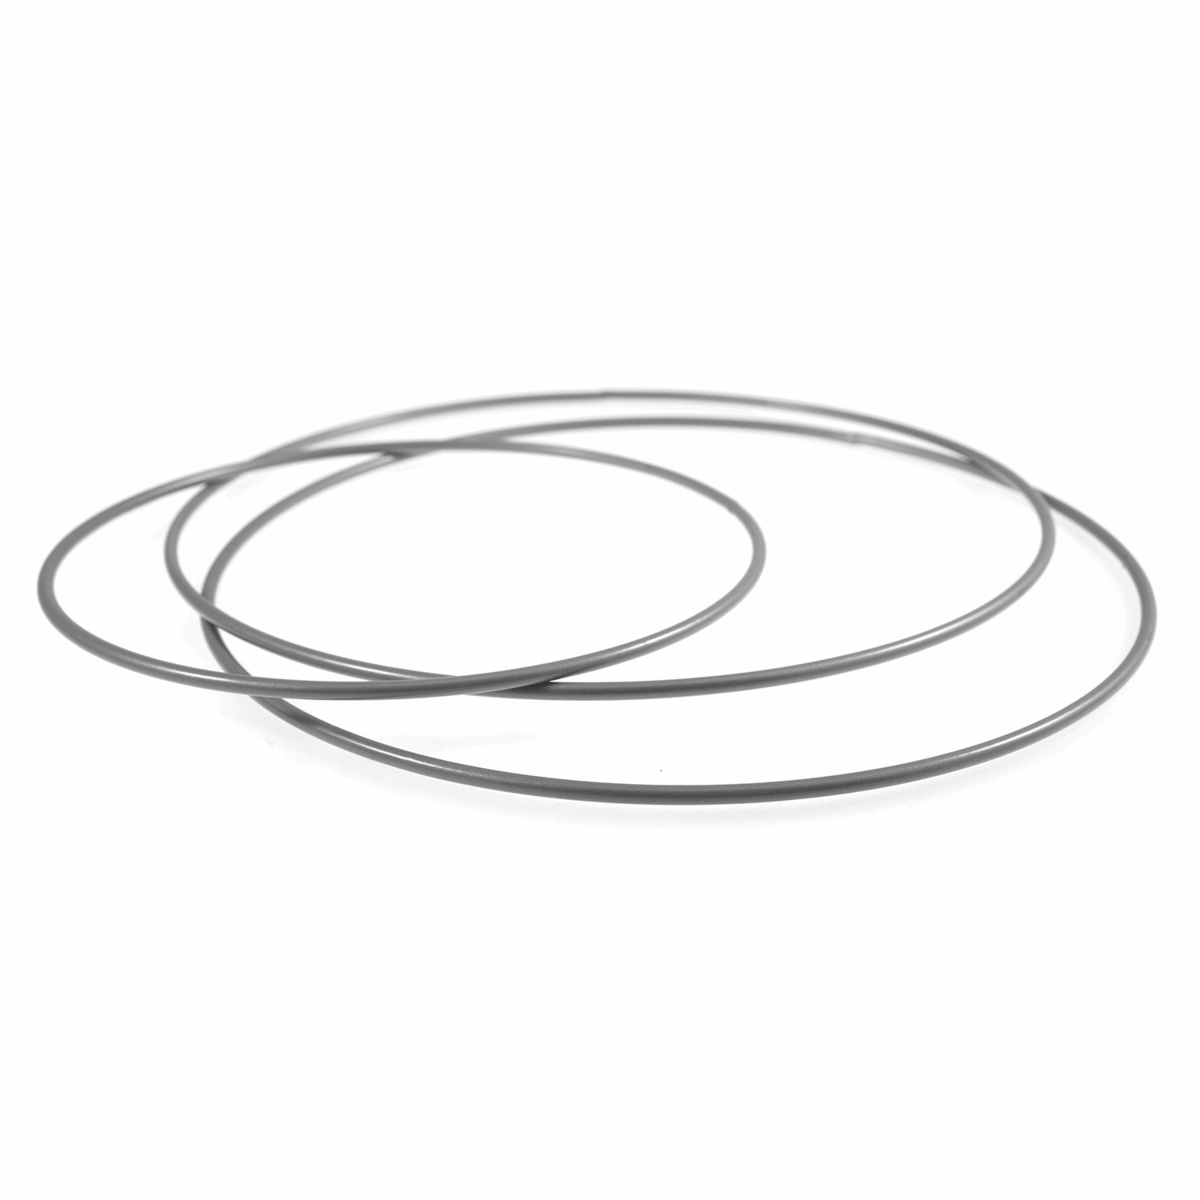 Trimits Silver Metal Wire Craft Hoops - 15-25cm (Set of 3 Sizes)